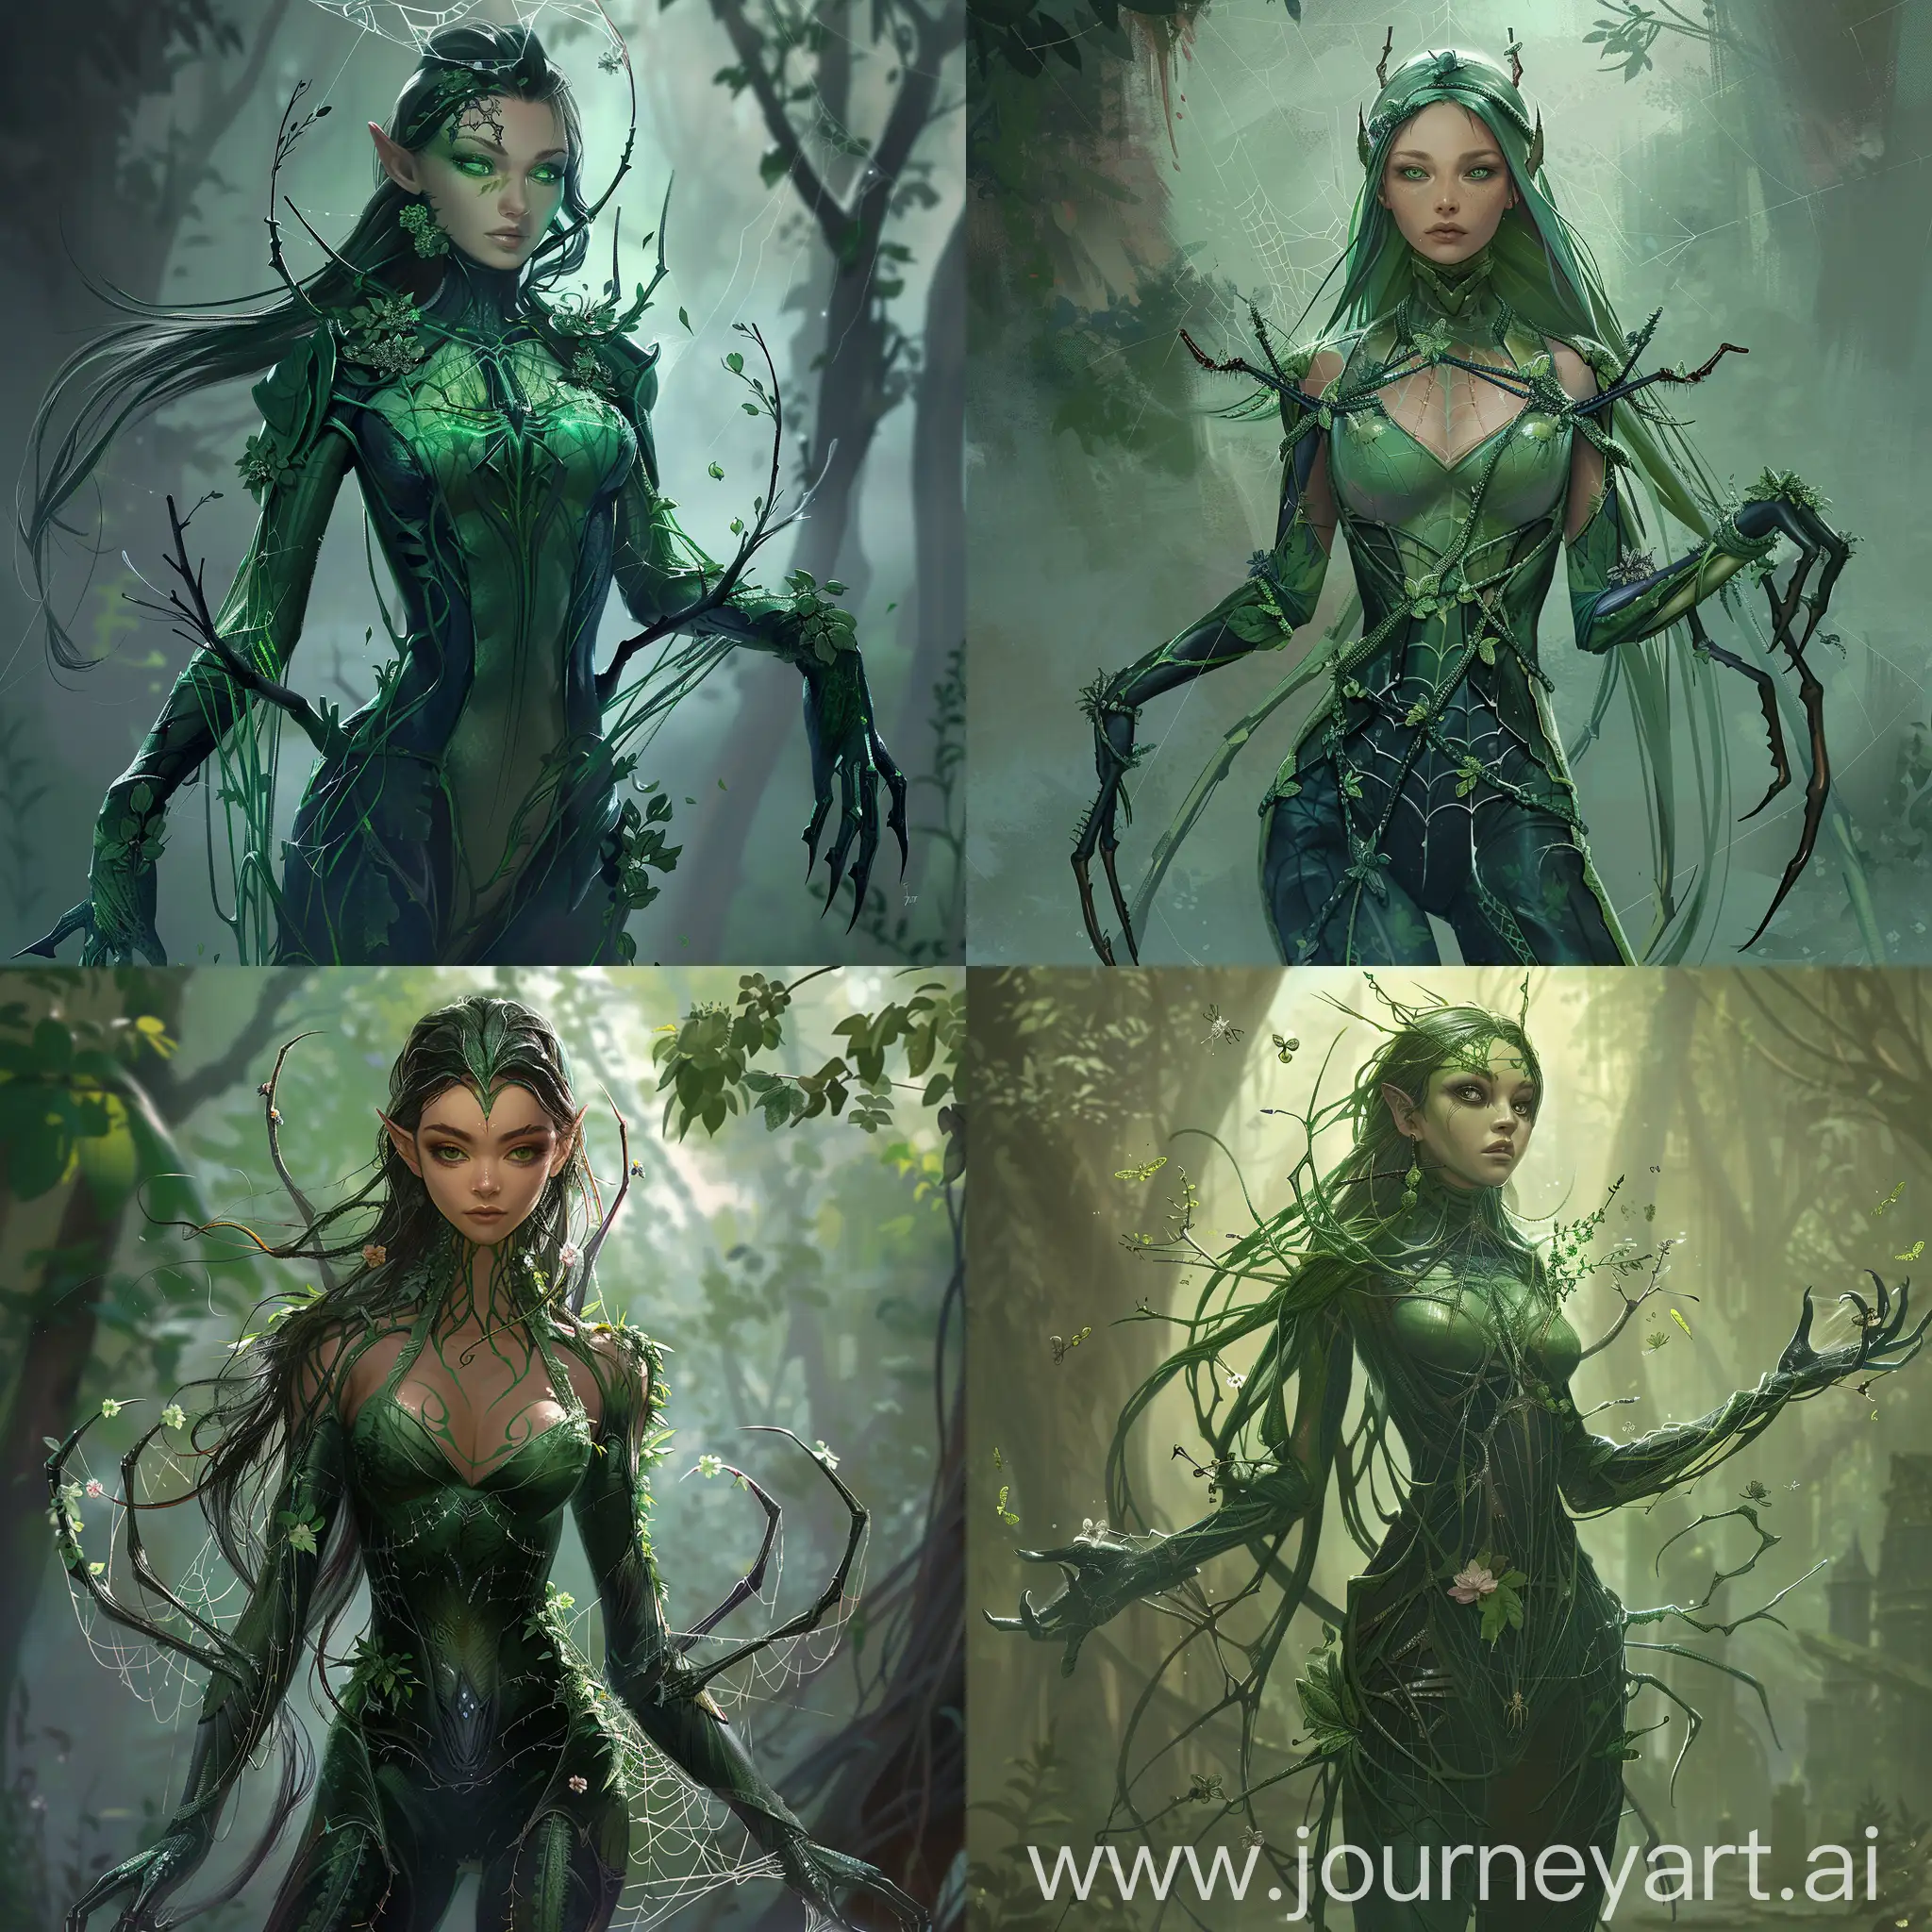 Noxian-Noblewoman-with-Spider-Traits-in-Enchanted-Forest